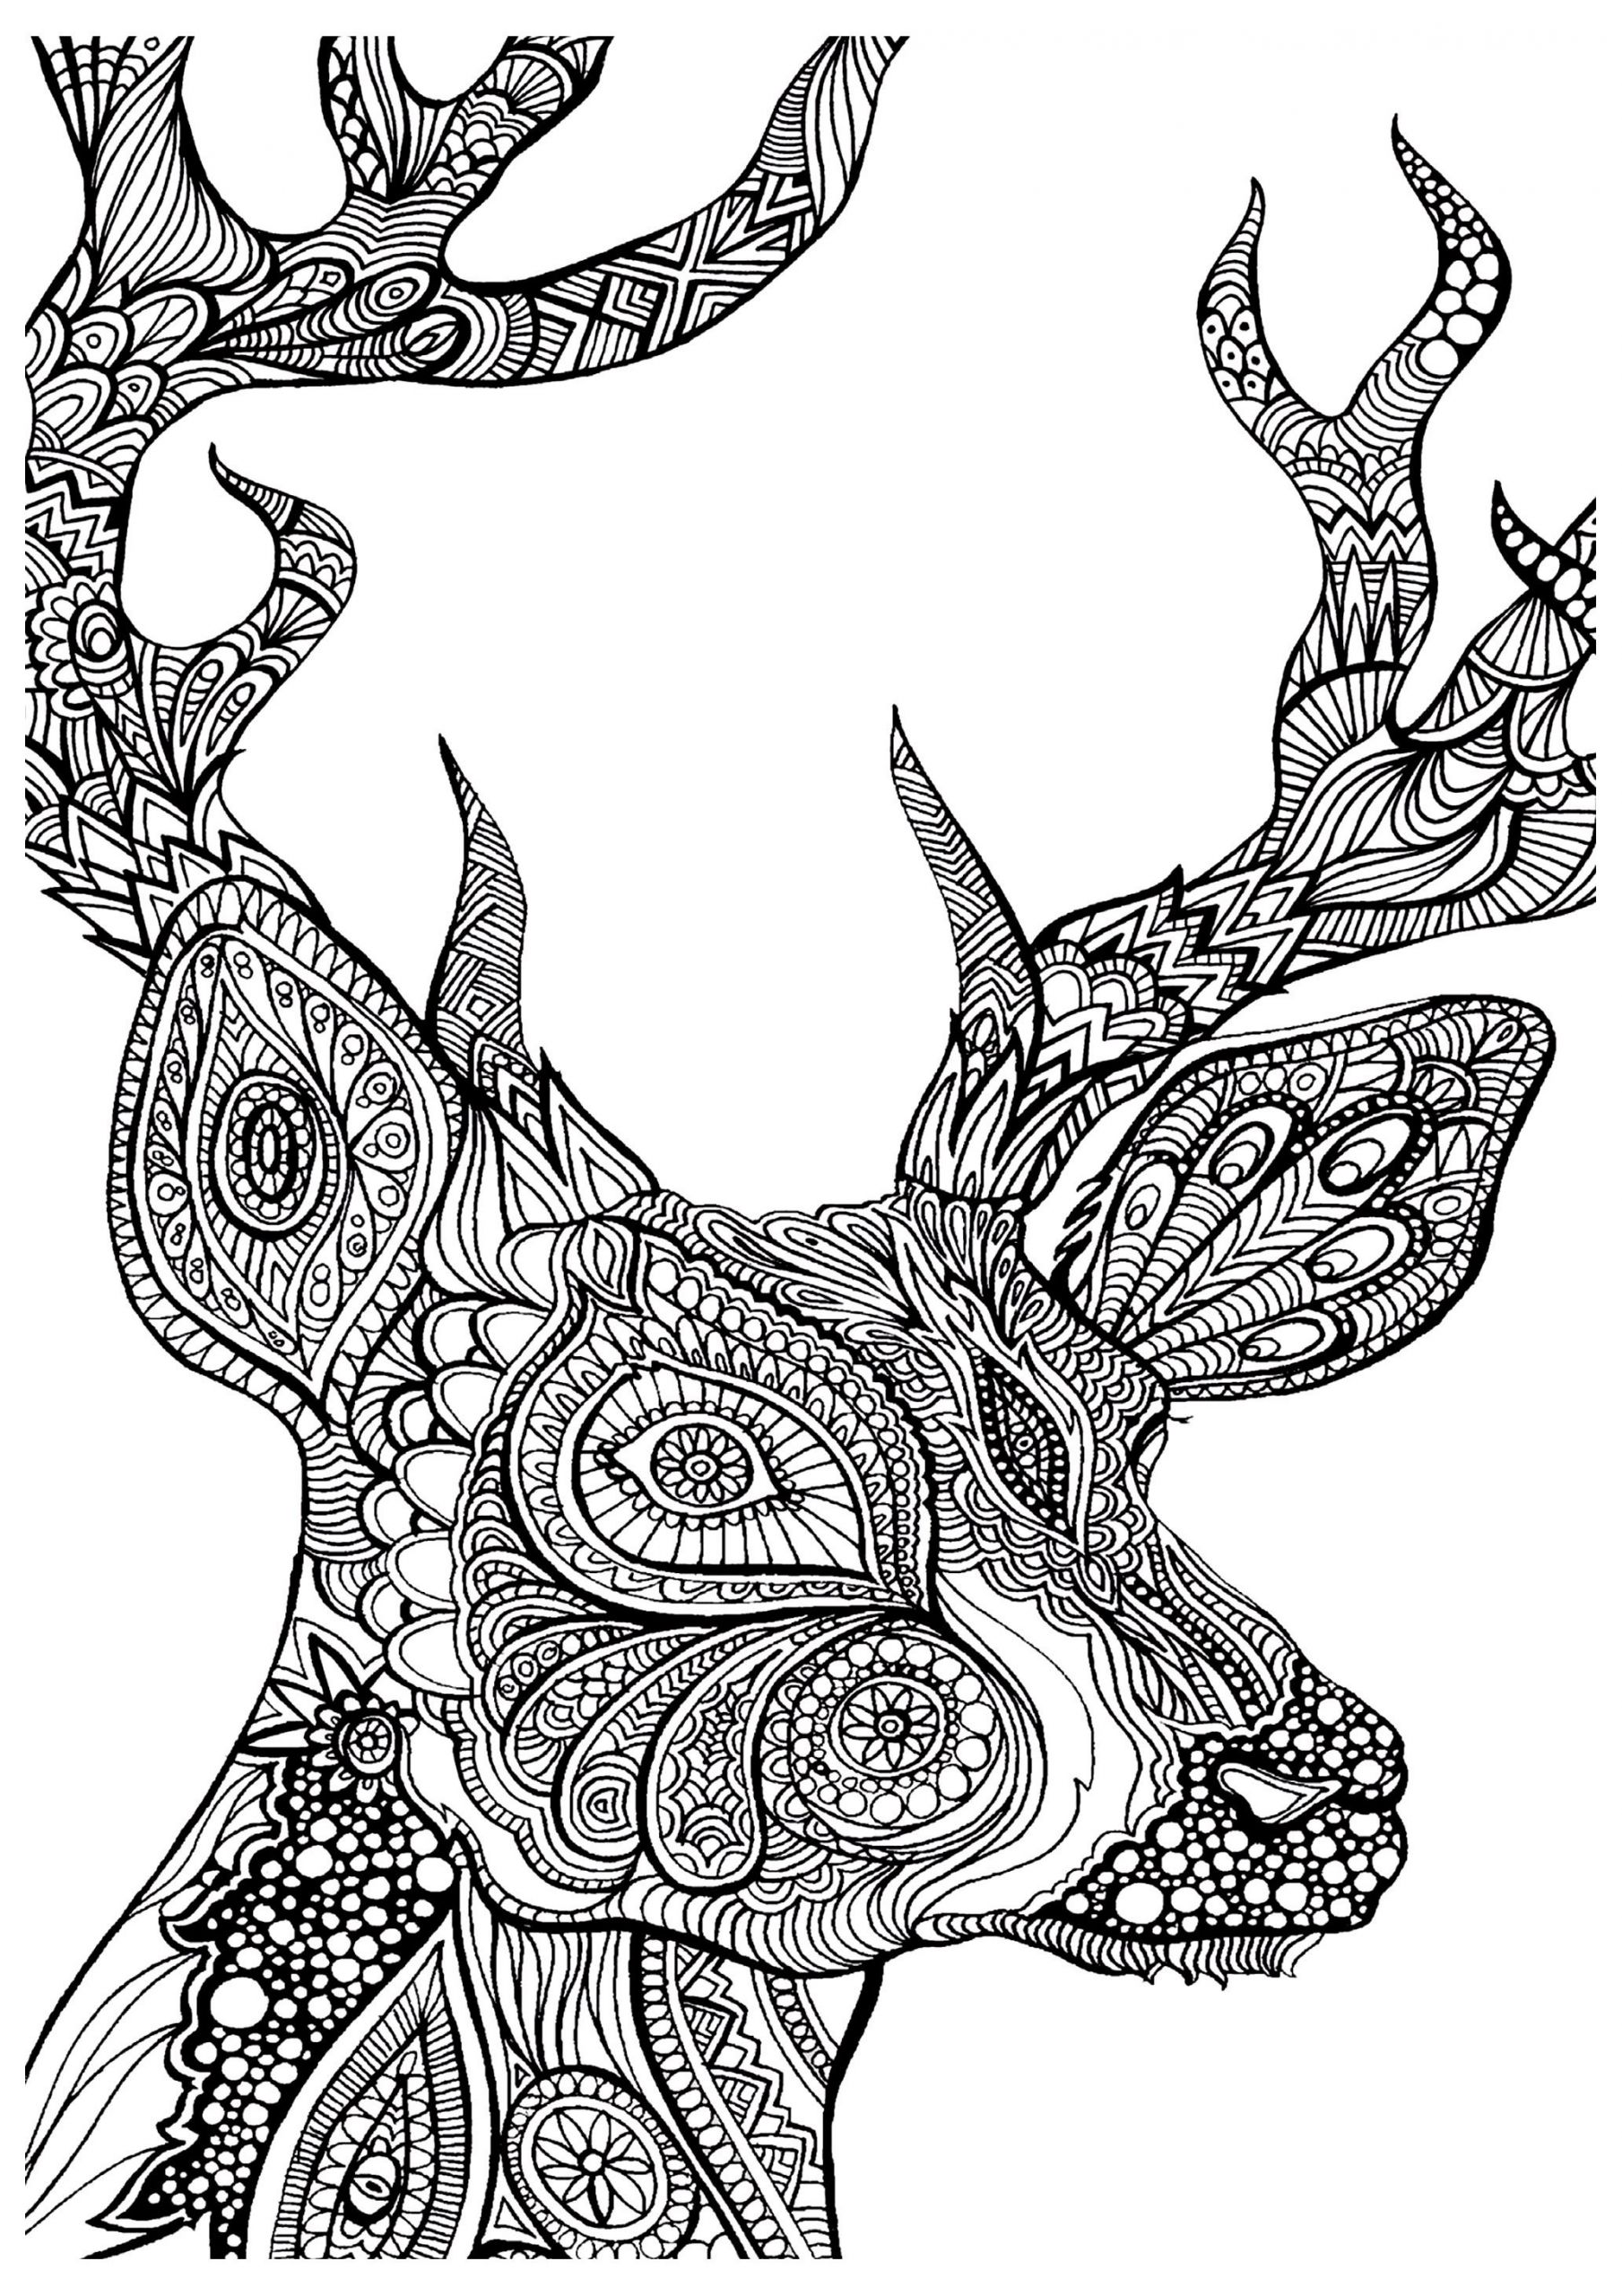 Coloring Book Adults
 19 of the Best Adult Colouring Pages Free Printables for